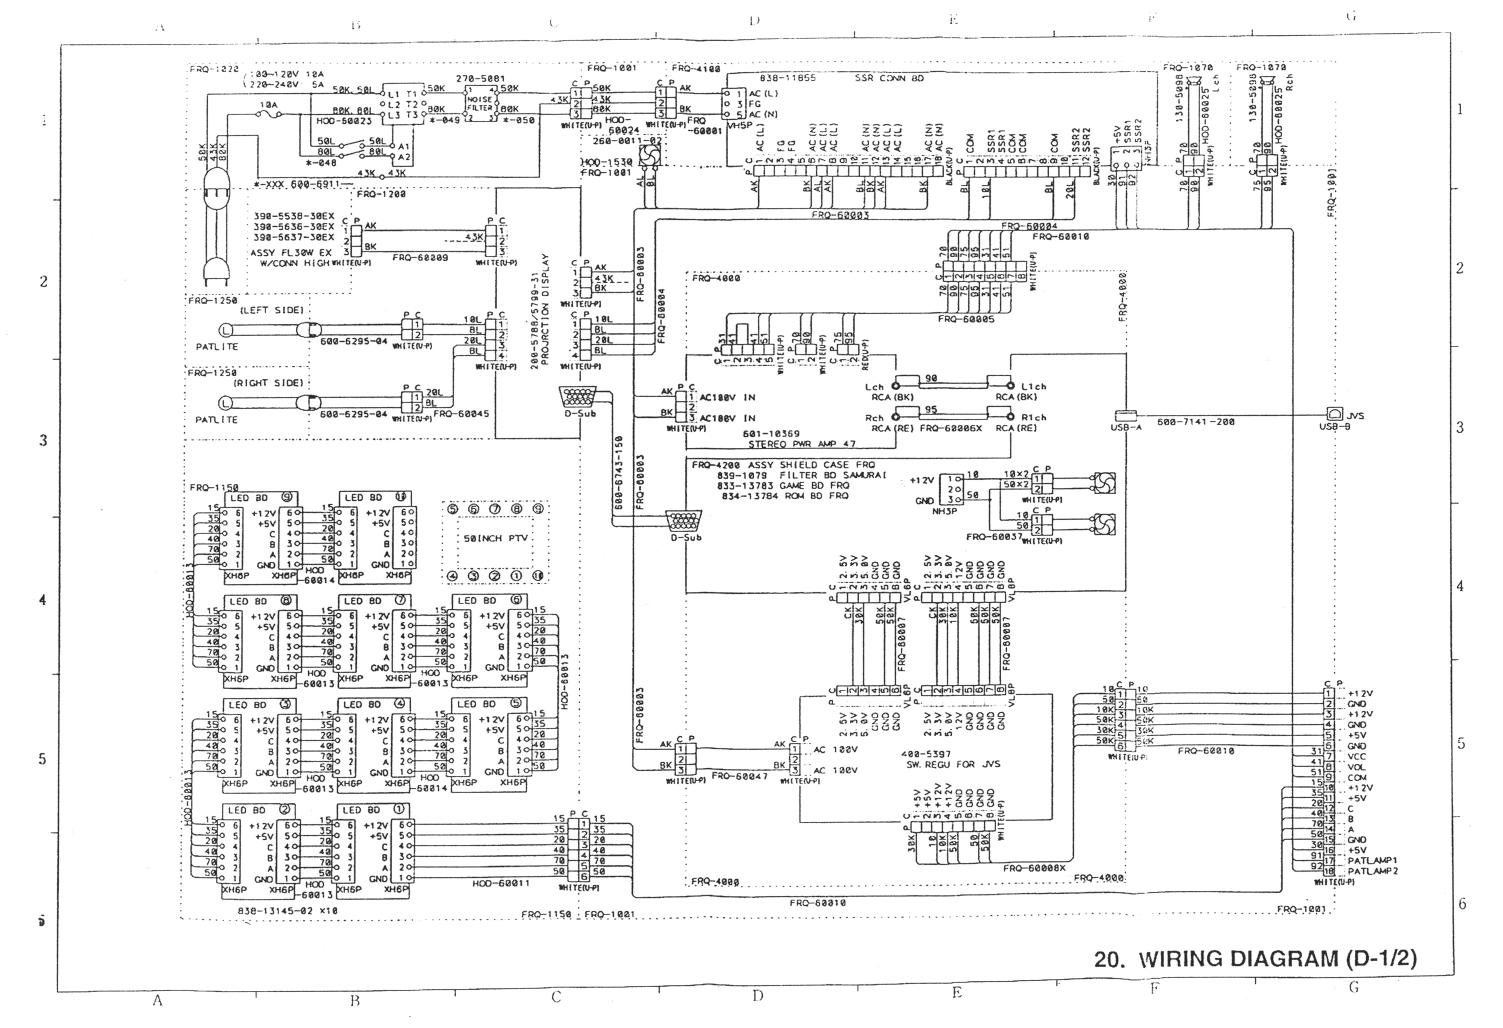 Brave Firefighters DX Wiring Diagrams